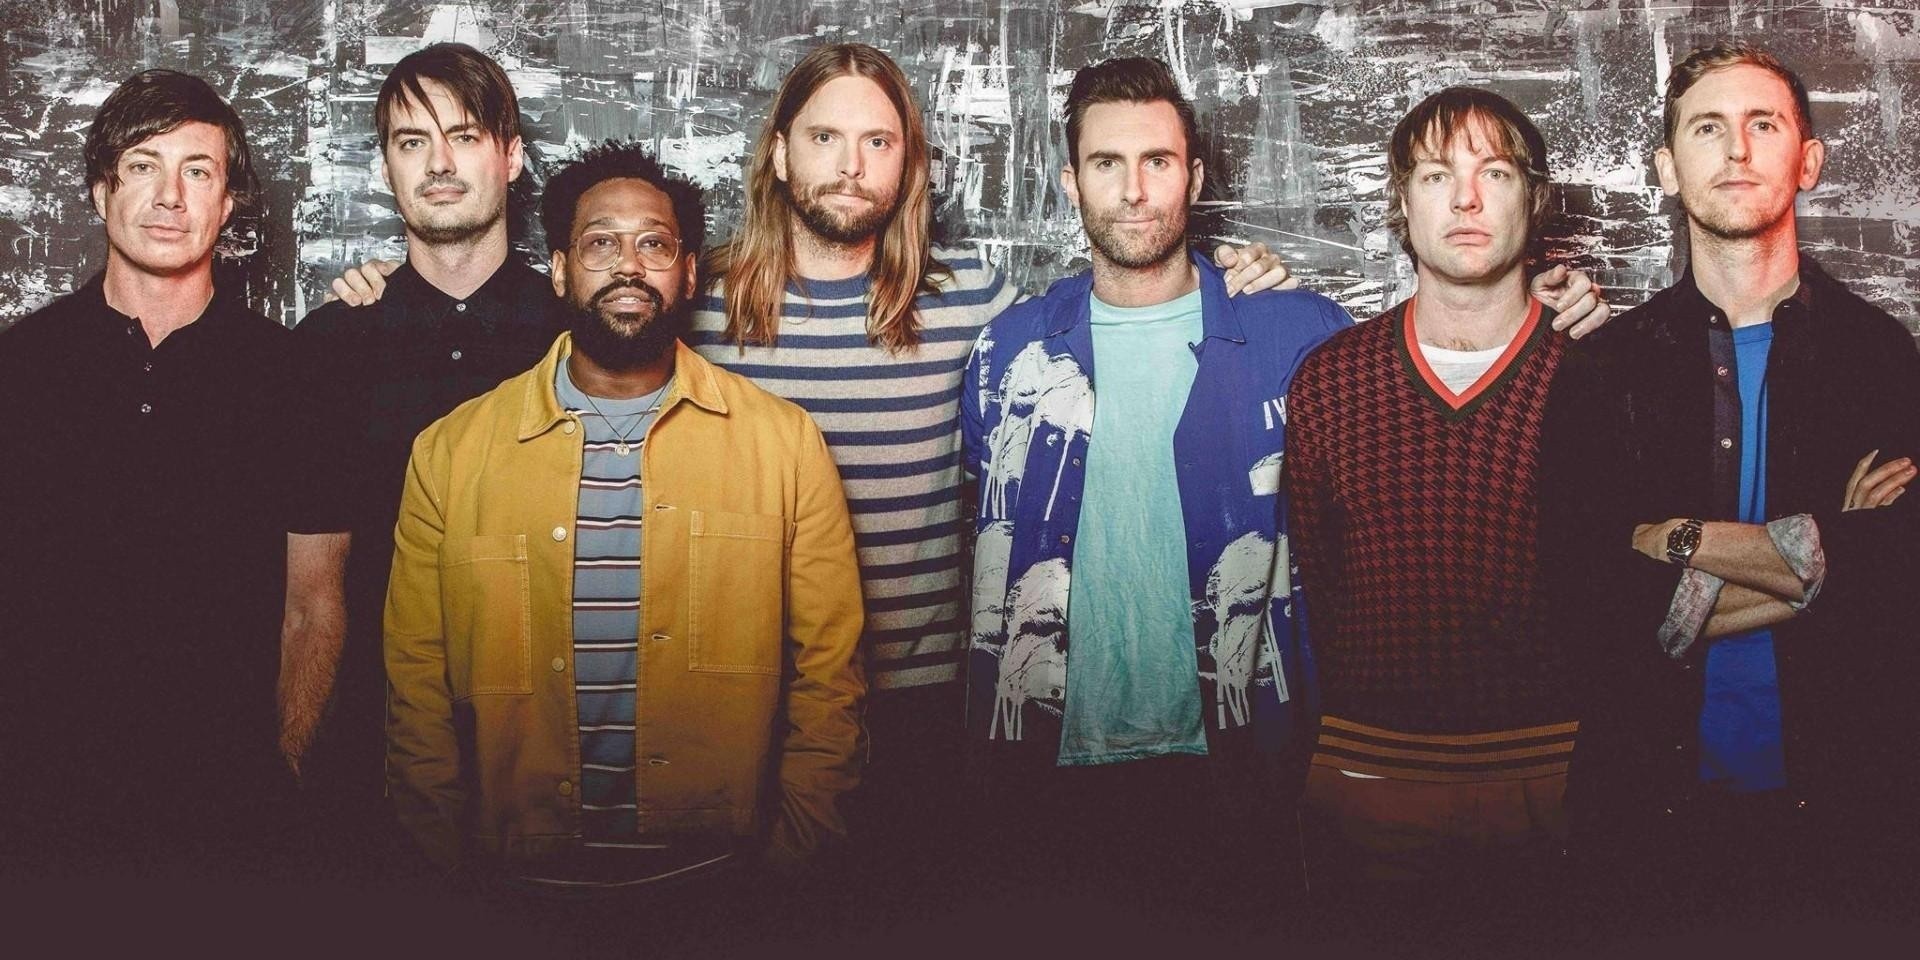 Ticketing info for Maroon 5's #REDPILLBLUES show in Singapore released 